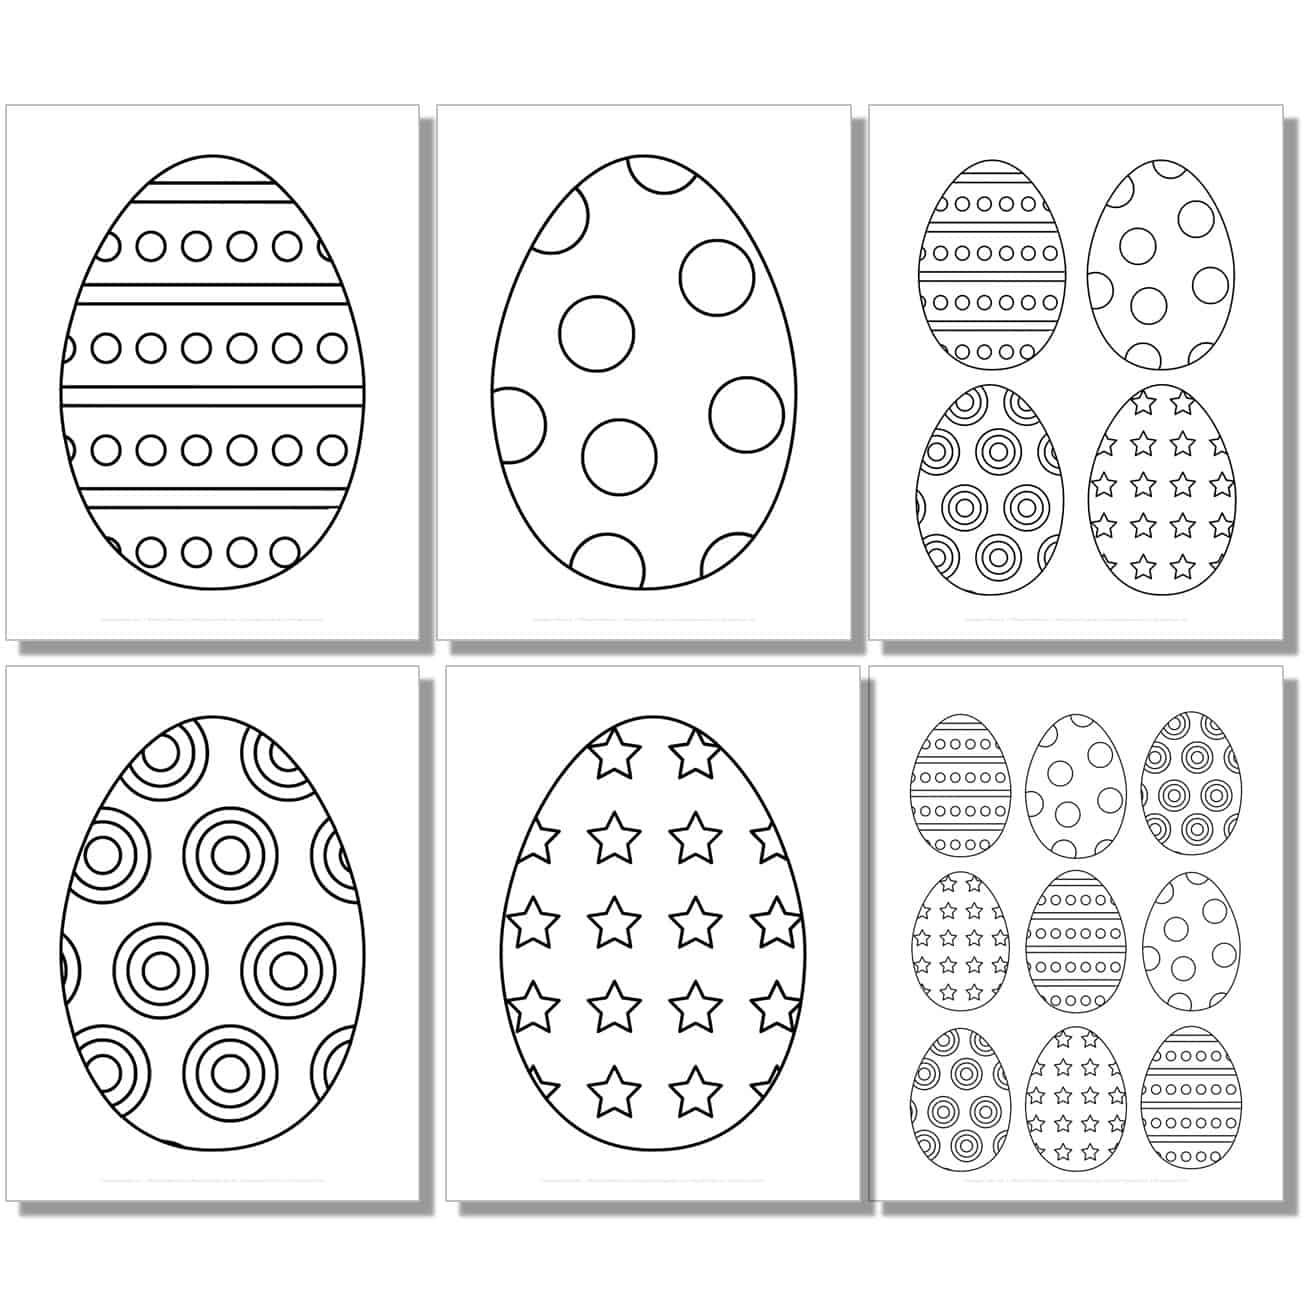 large, medium, small fun patterned easter egg templates, outlines, stencils.